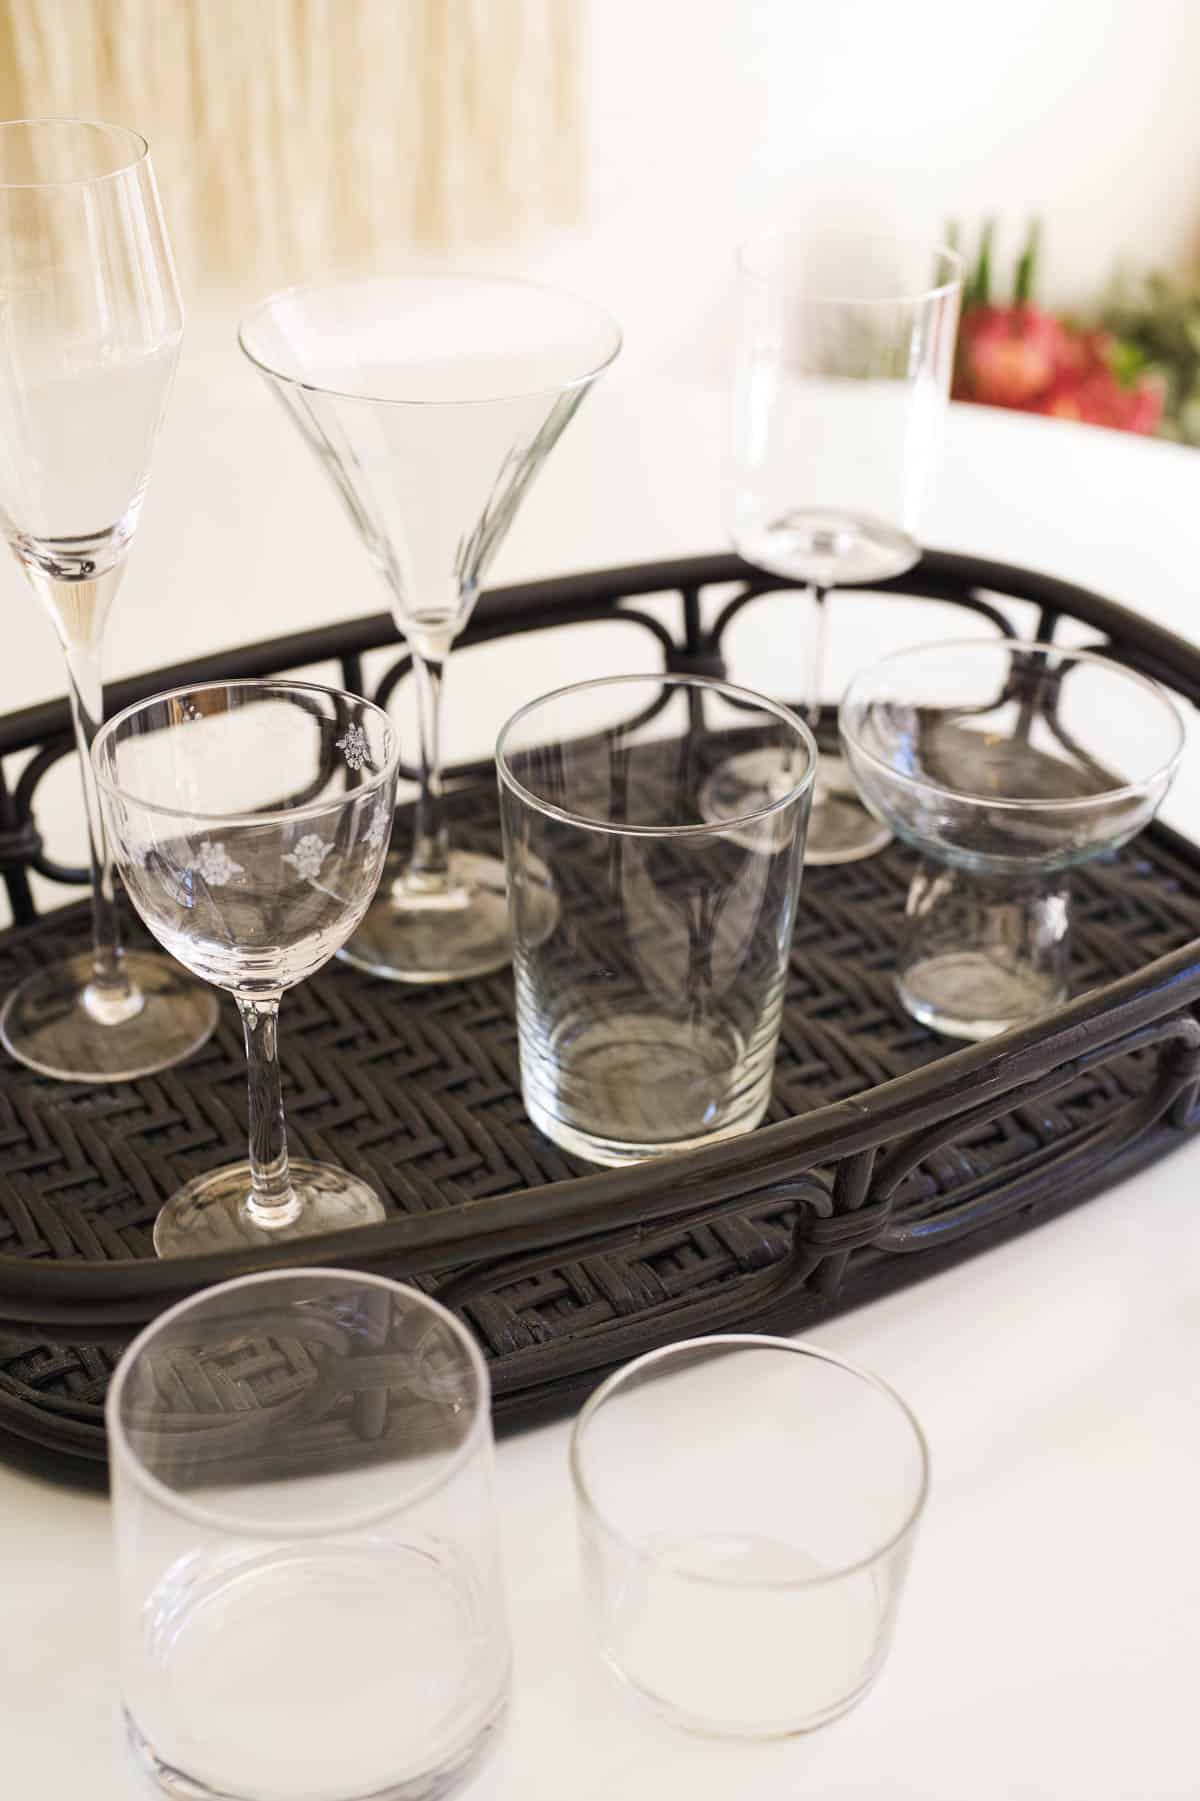 A variety of cocktail glassware on a table and on a black tray on a table.